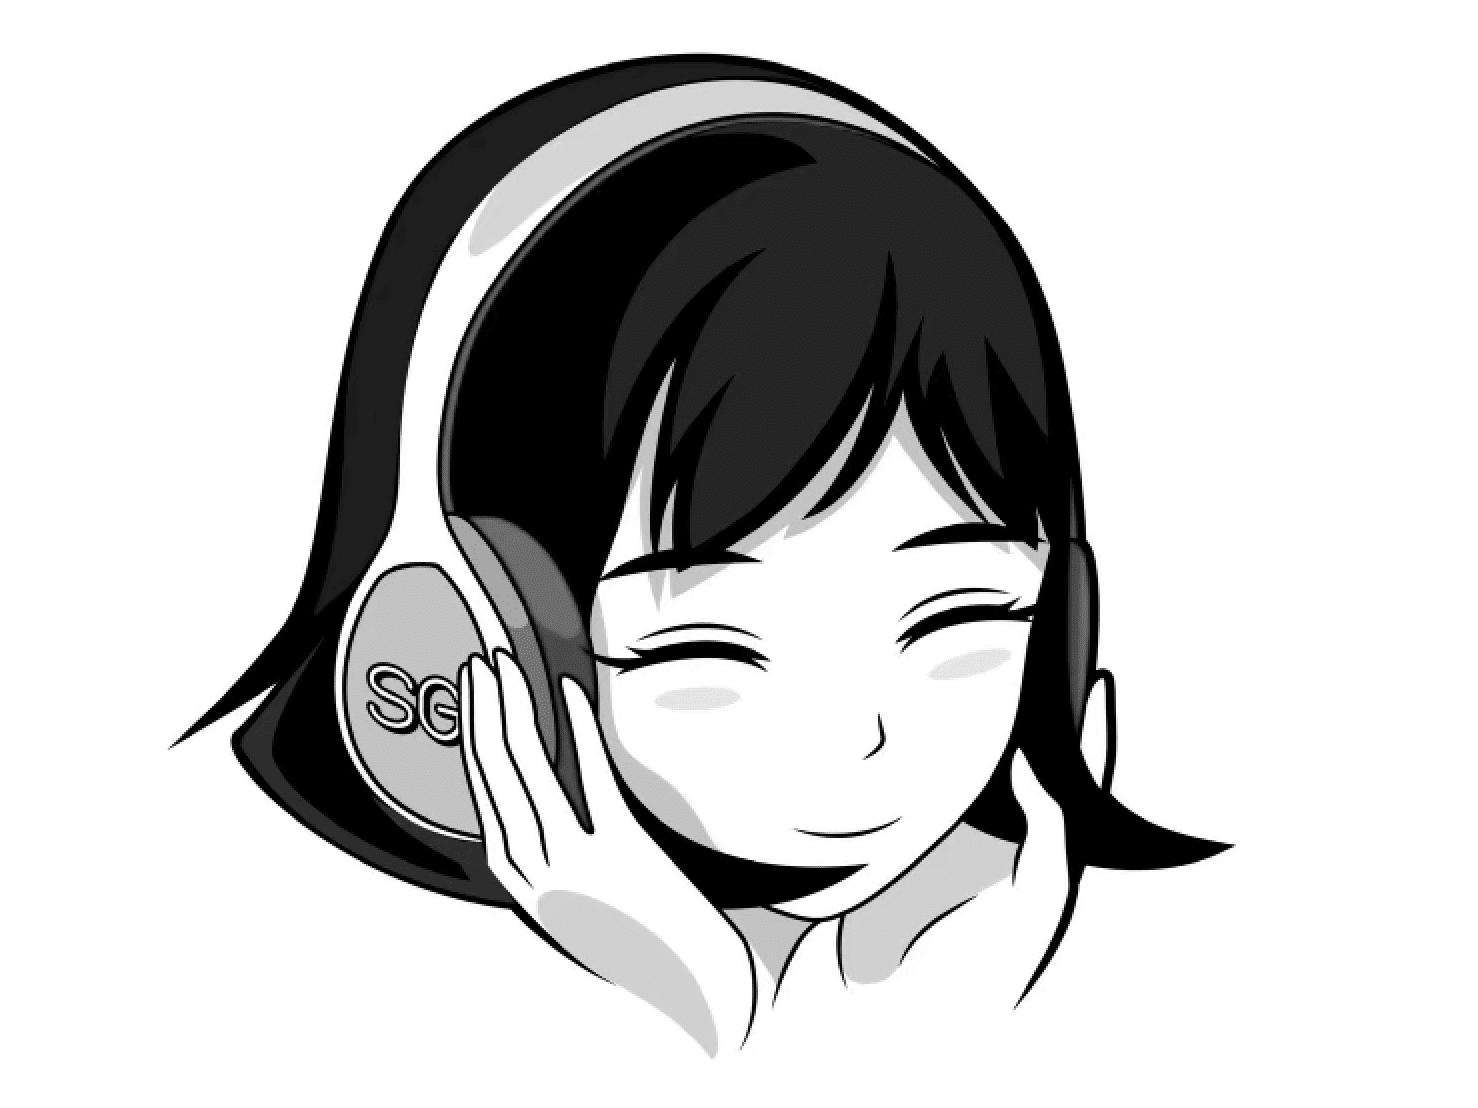 A black and white illustration of a girl wearing headphones mastering her music.